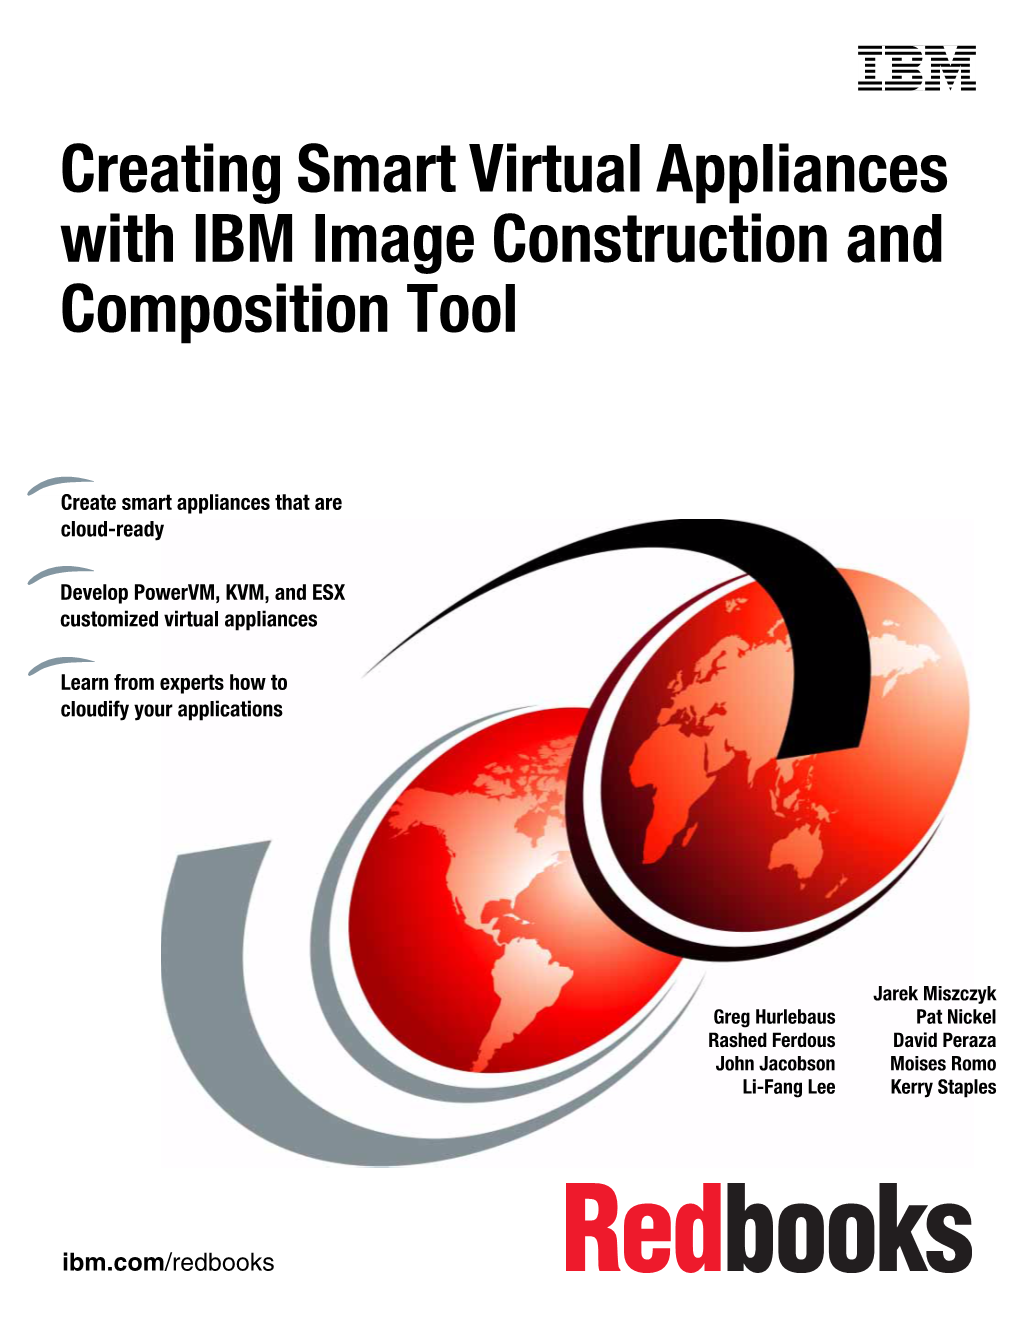 Creating Smart Virtual Appliances with IBM Image Construction and Composition Tool